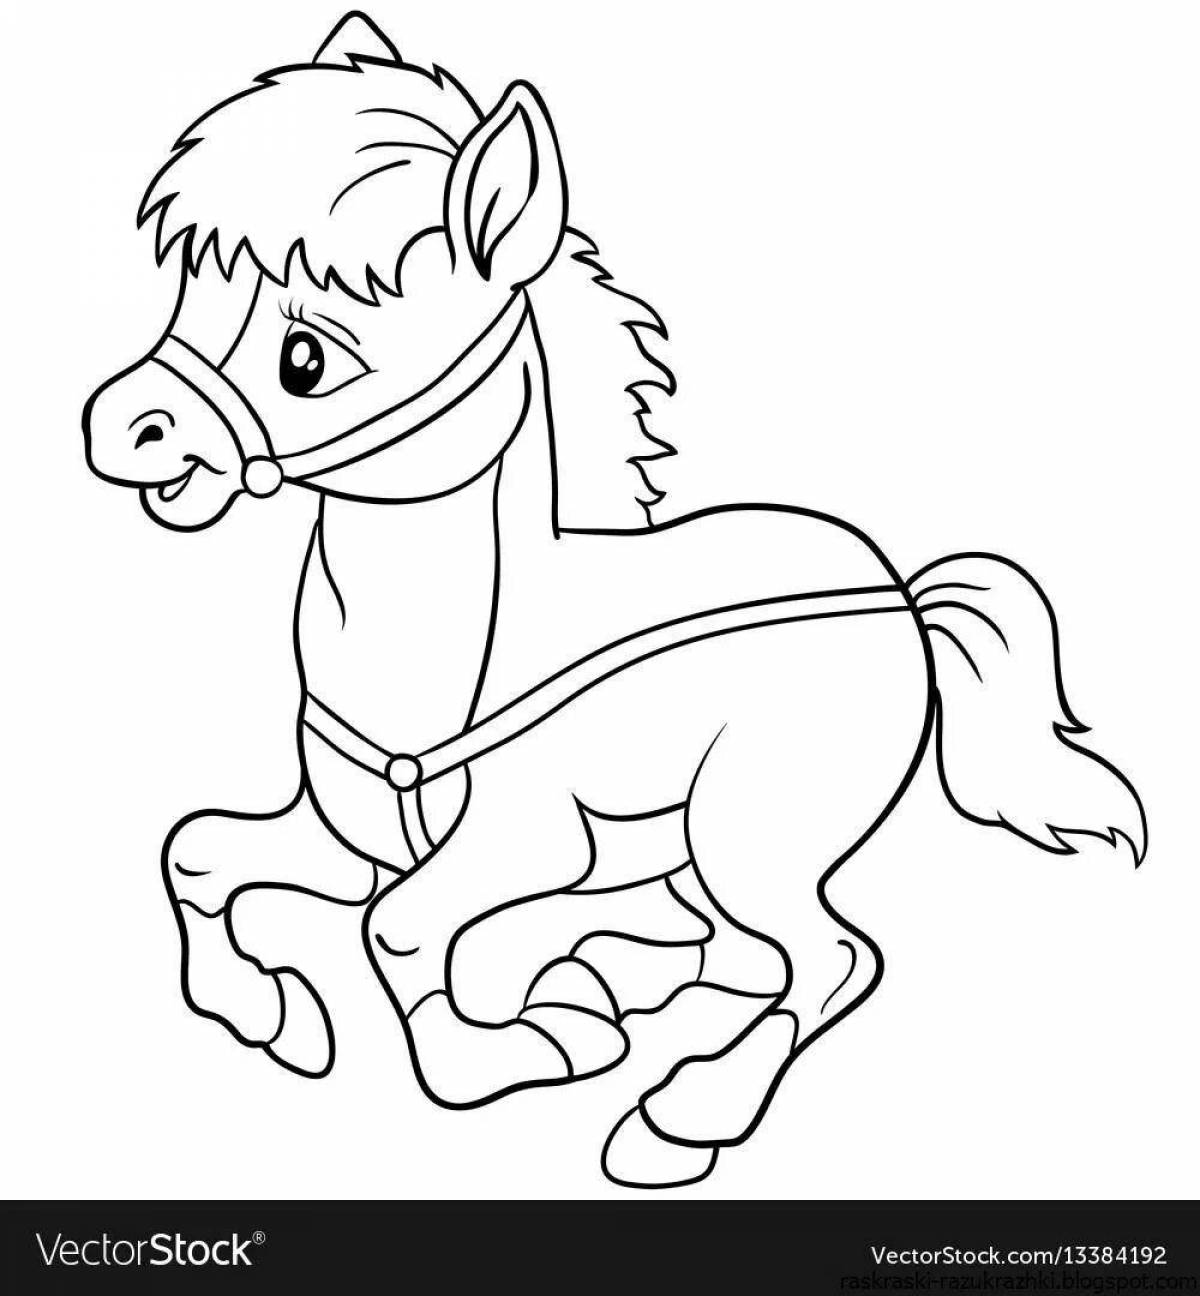 Live coloring horse for children 2-3 years old